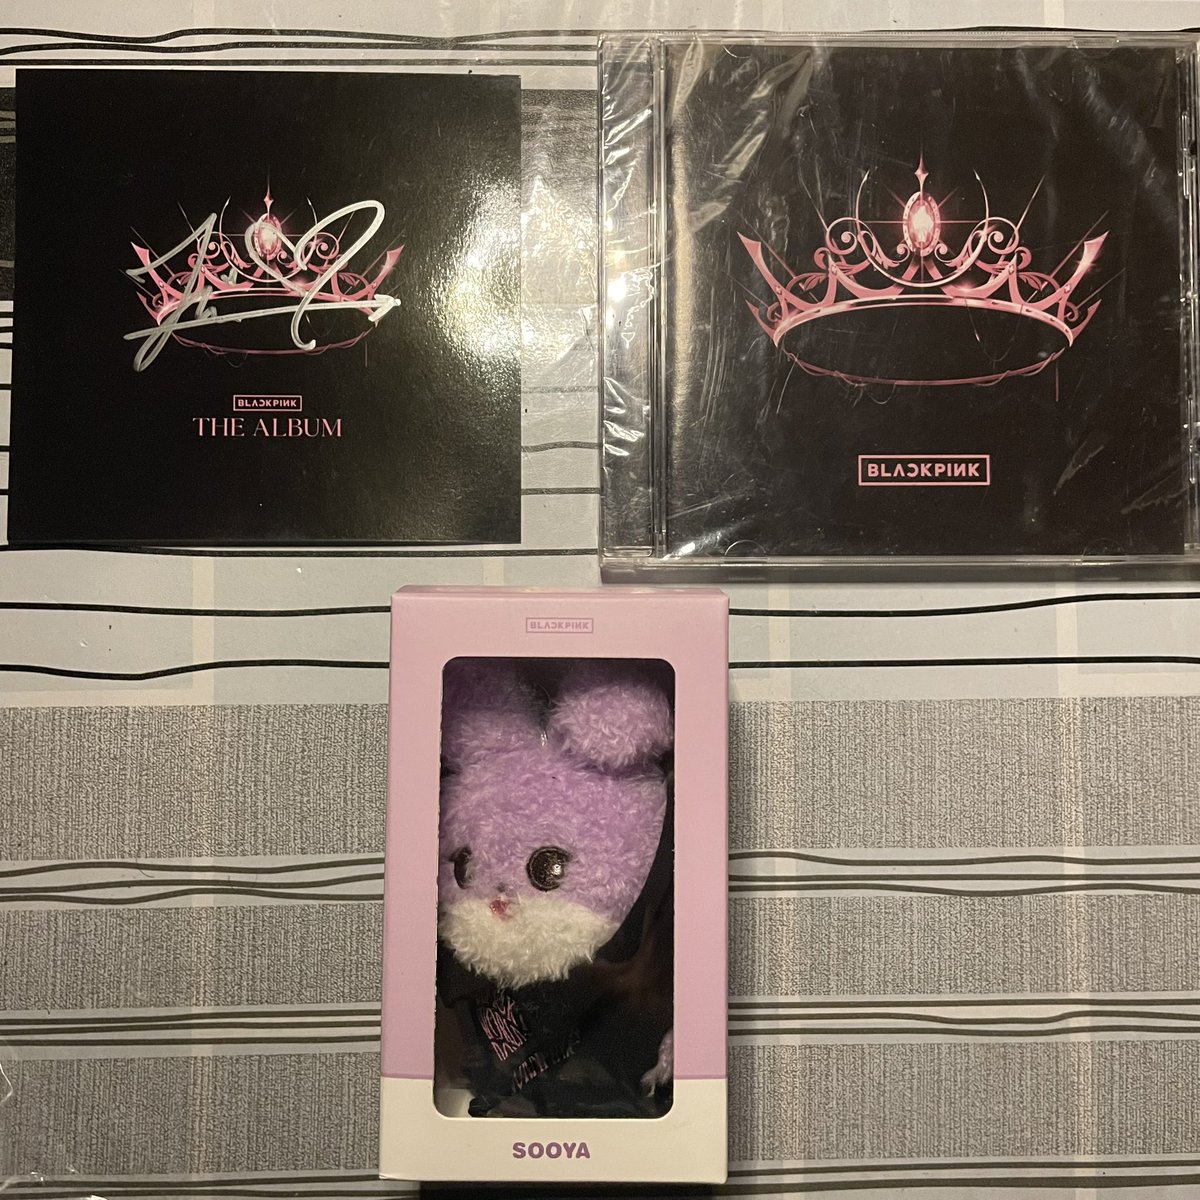 WTS/ LFB BLACKPINK BUNDLE MERCH WITH SIGNED CARD

2500 PHP per member + LSF 

Kindly DM us to order

#BeulpingONHAND